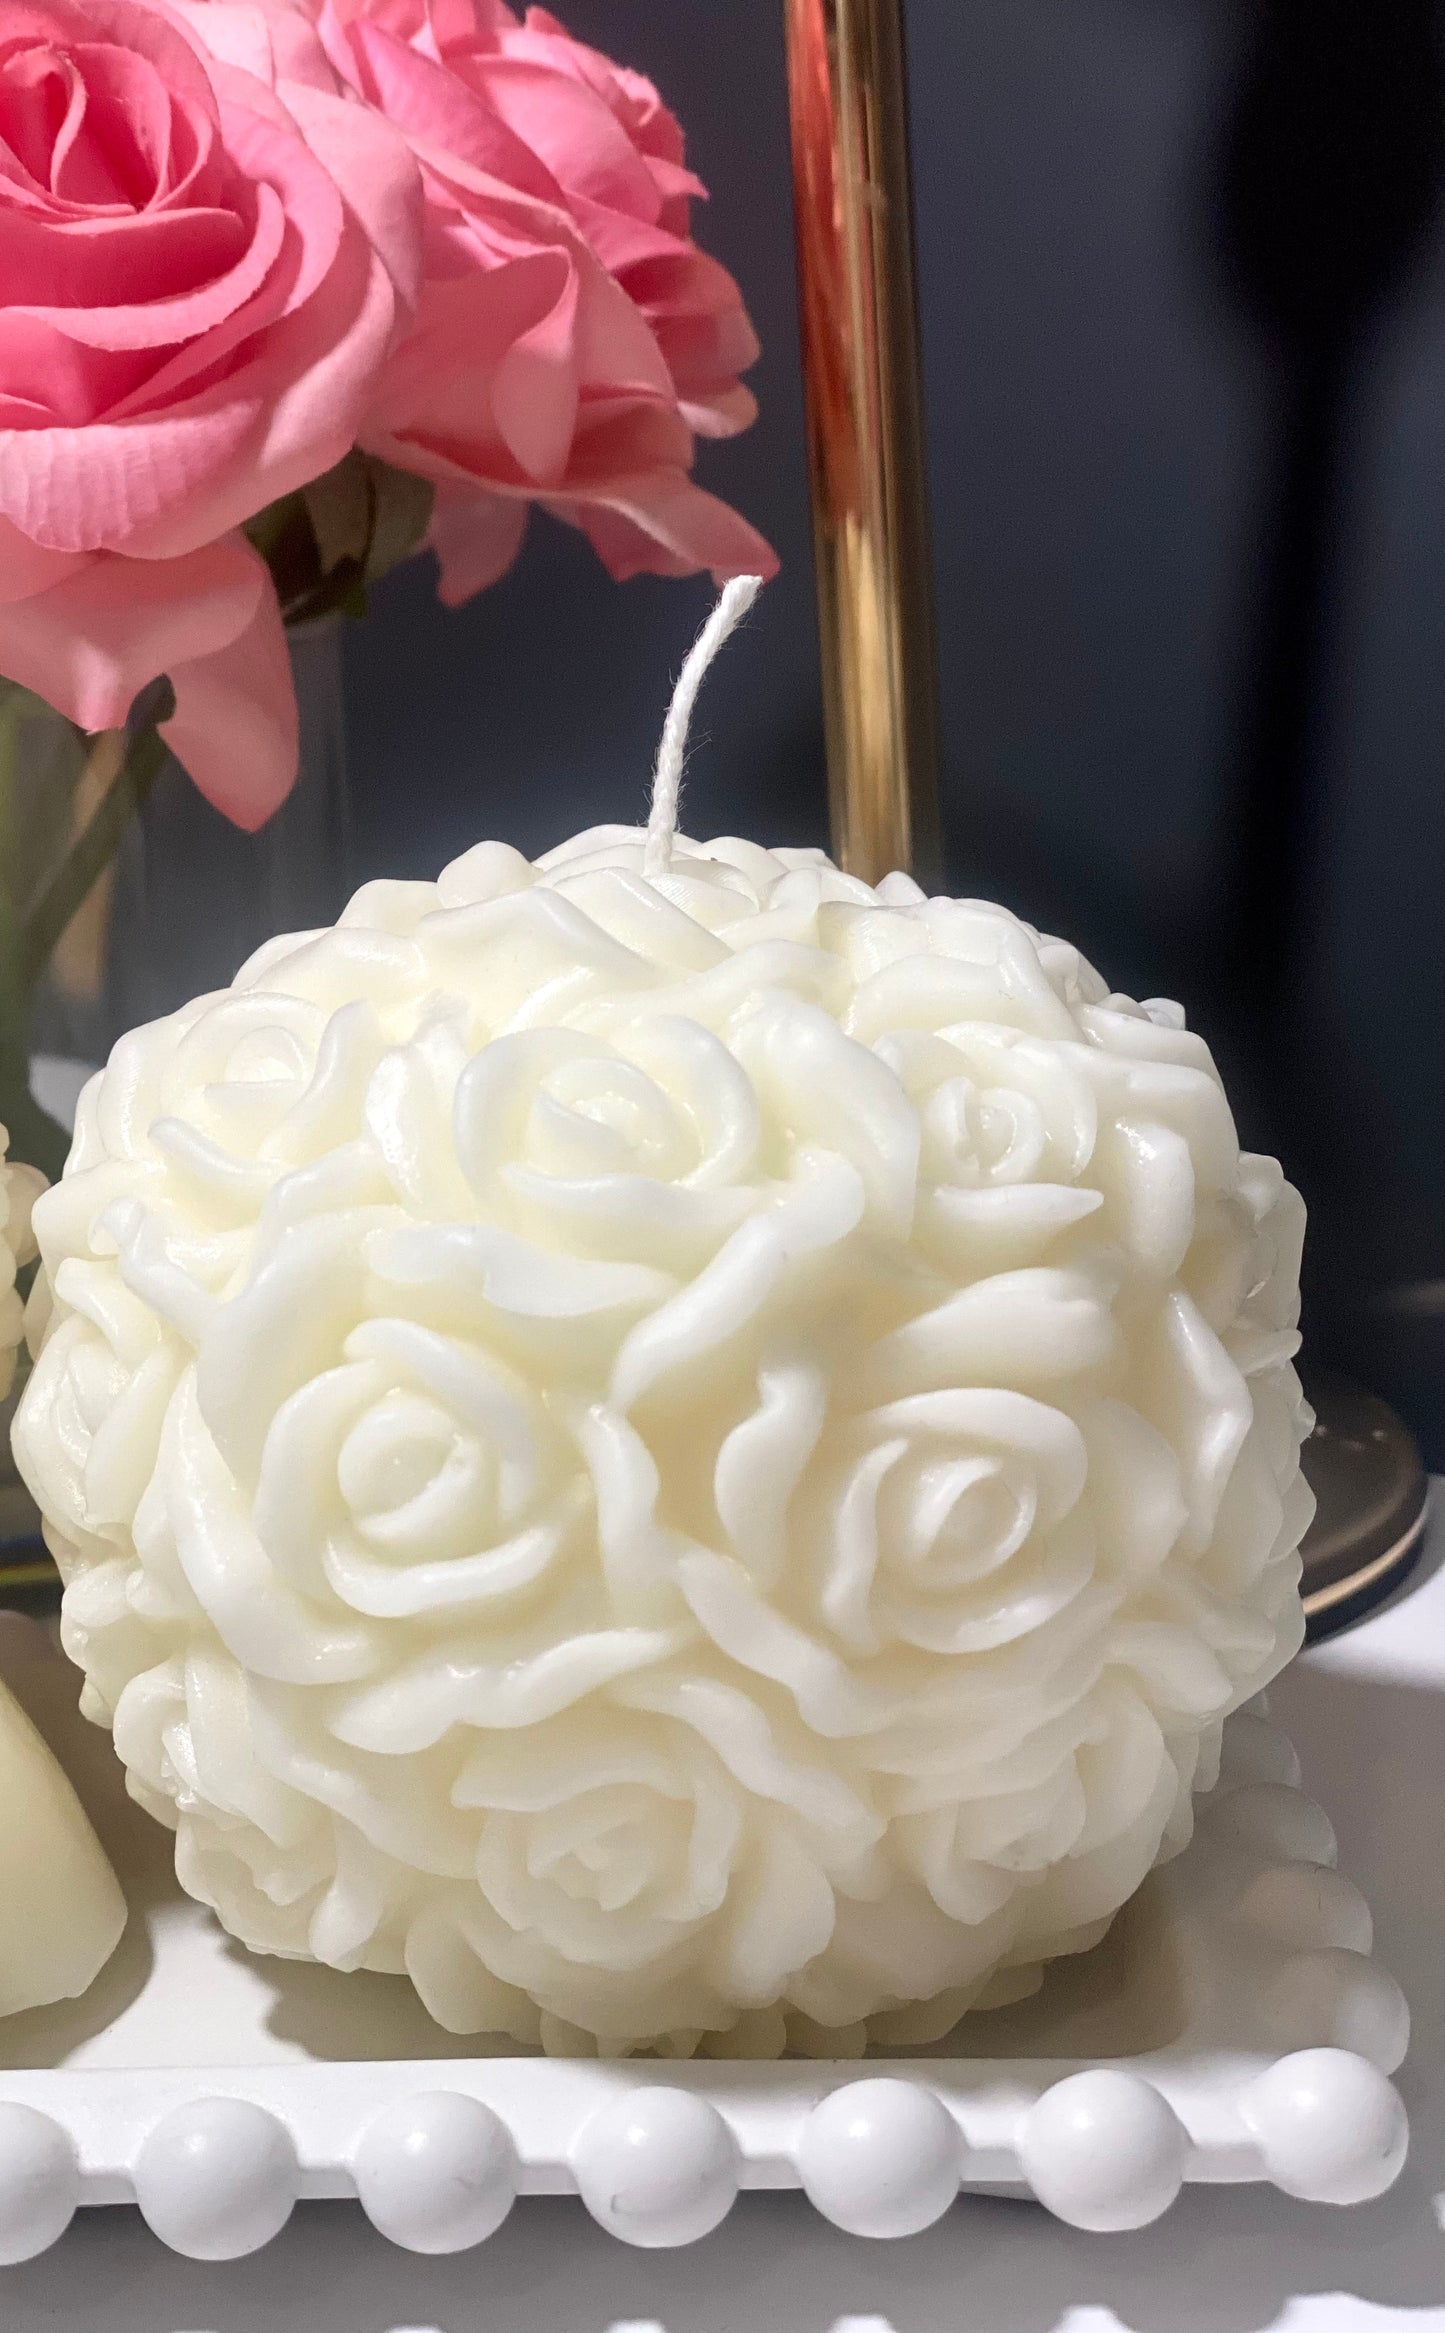 ROSE BALL CANDLE